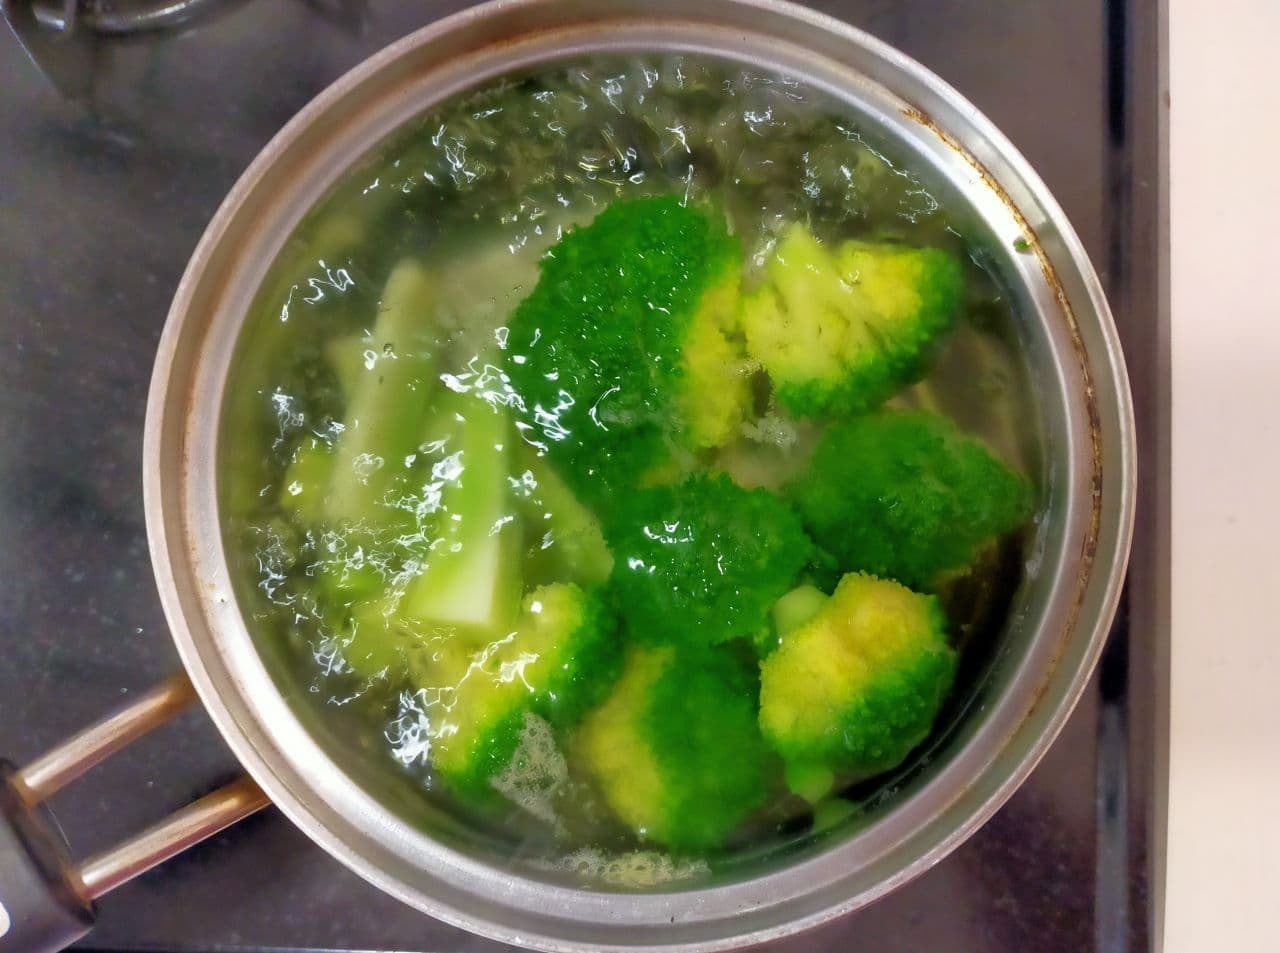 Step 3 How to boil broccoli